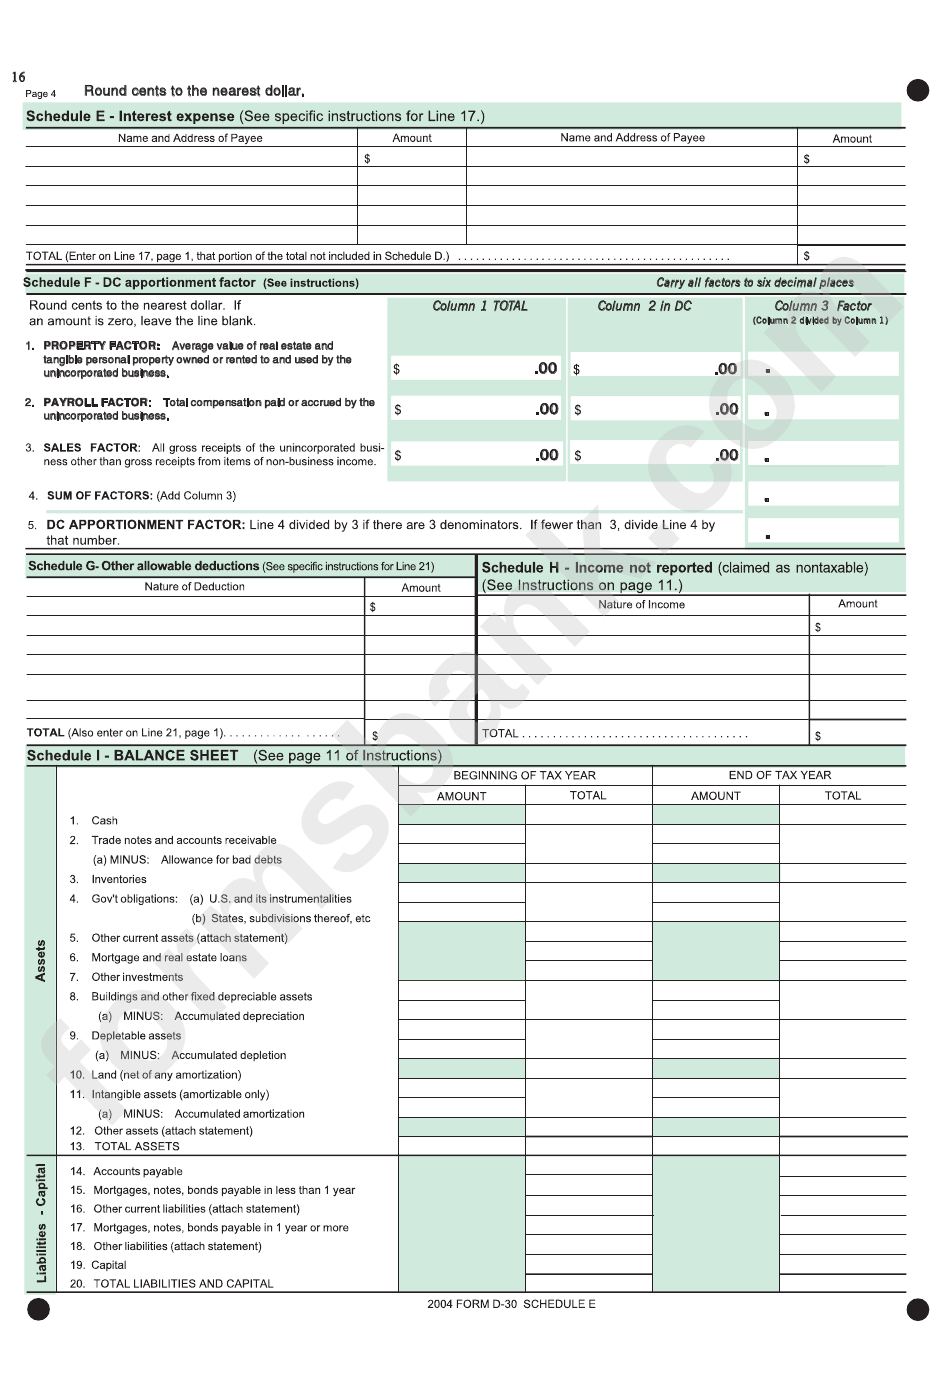 Form D-30 - Unincorporated Business Franchise Tax Return - 2004